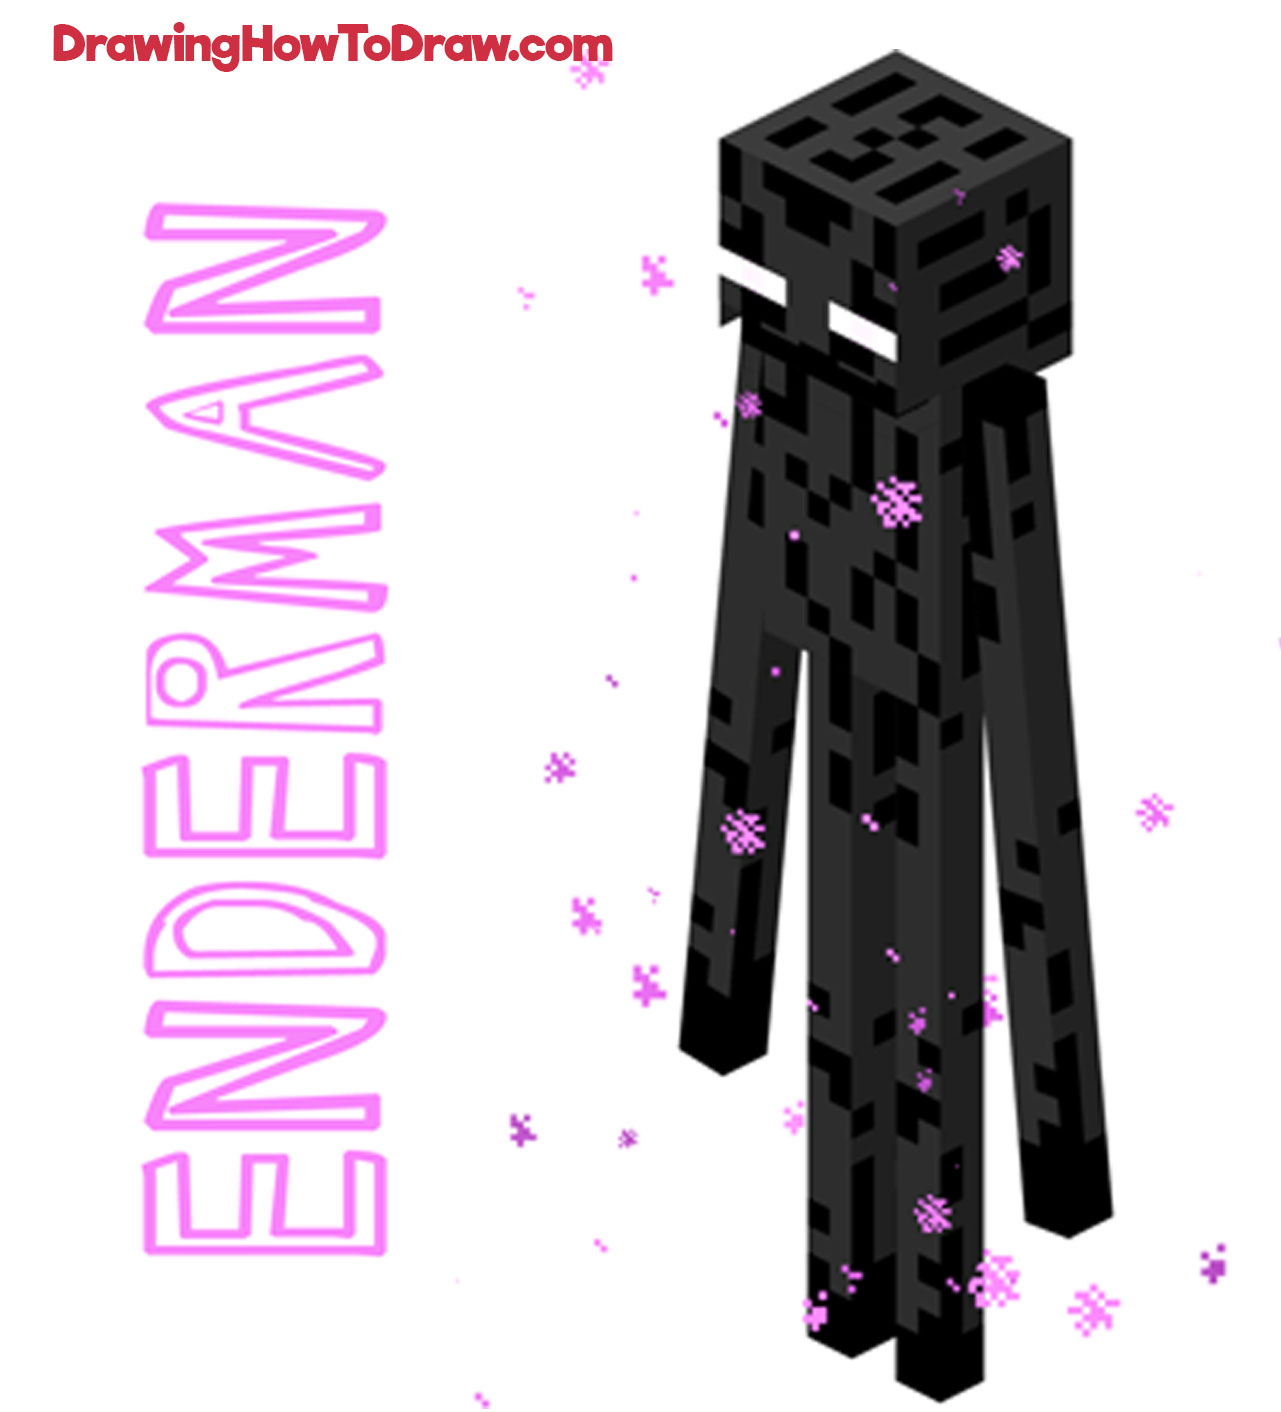 How To Draw Enderman From Minecraft Drawing Tutorial How To Draw